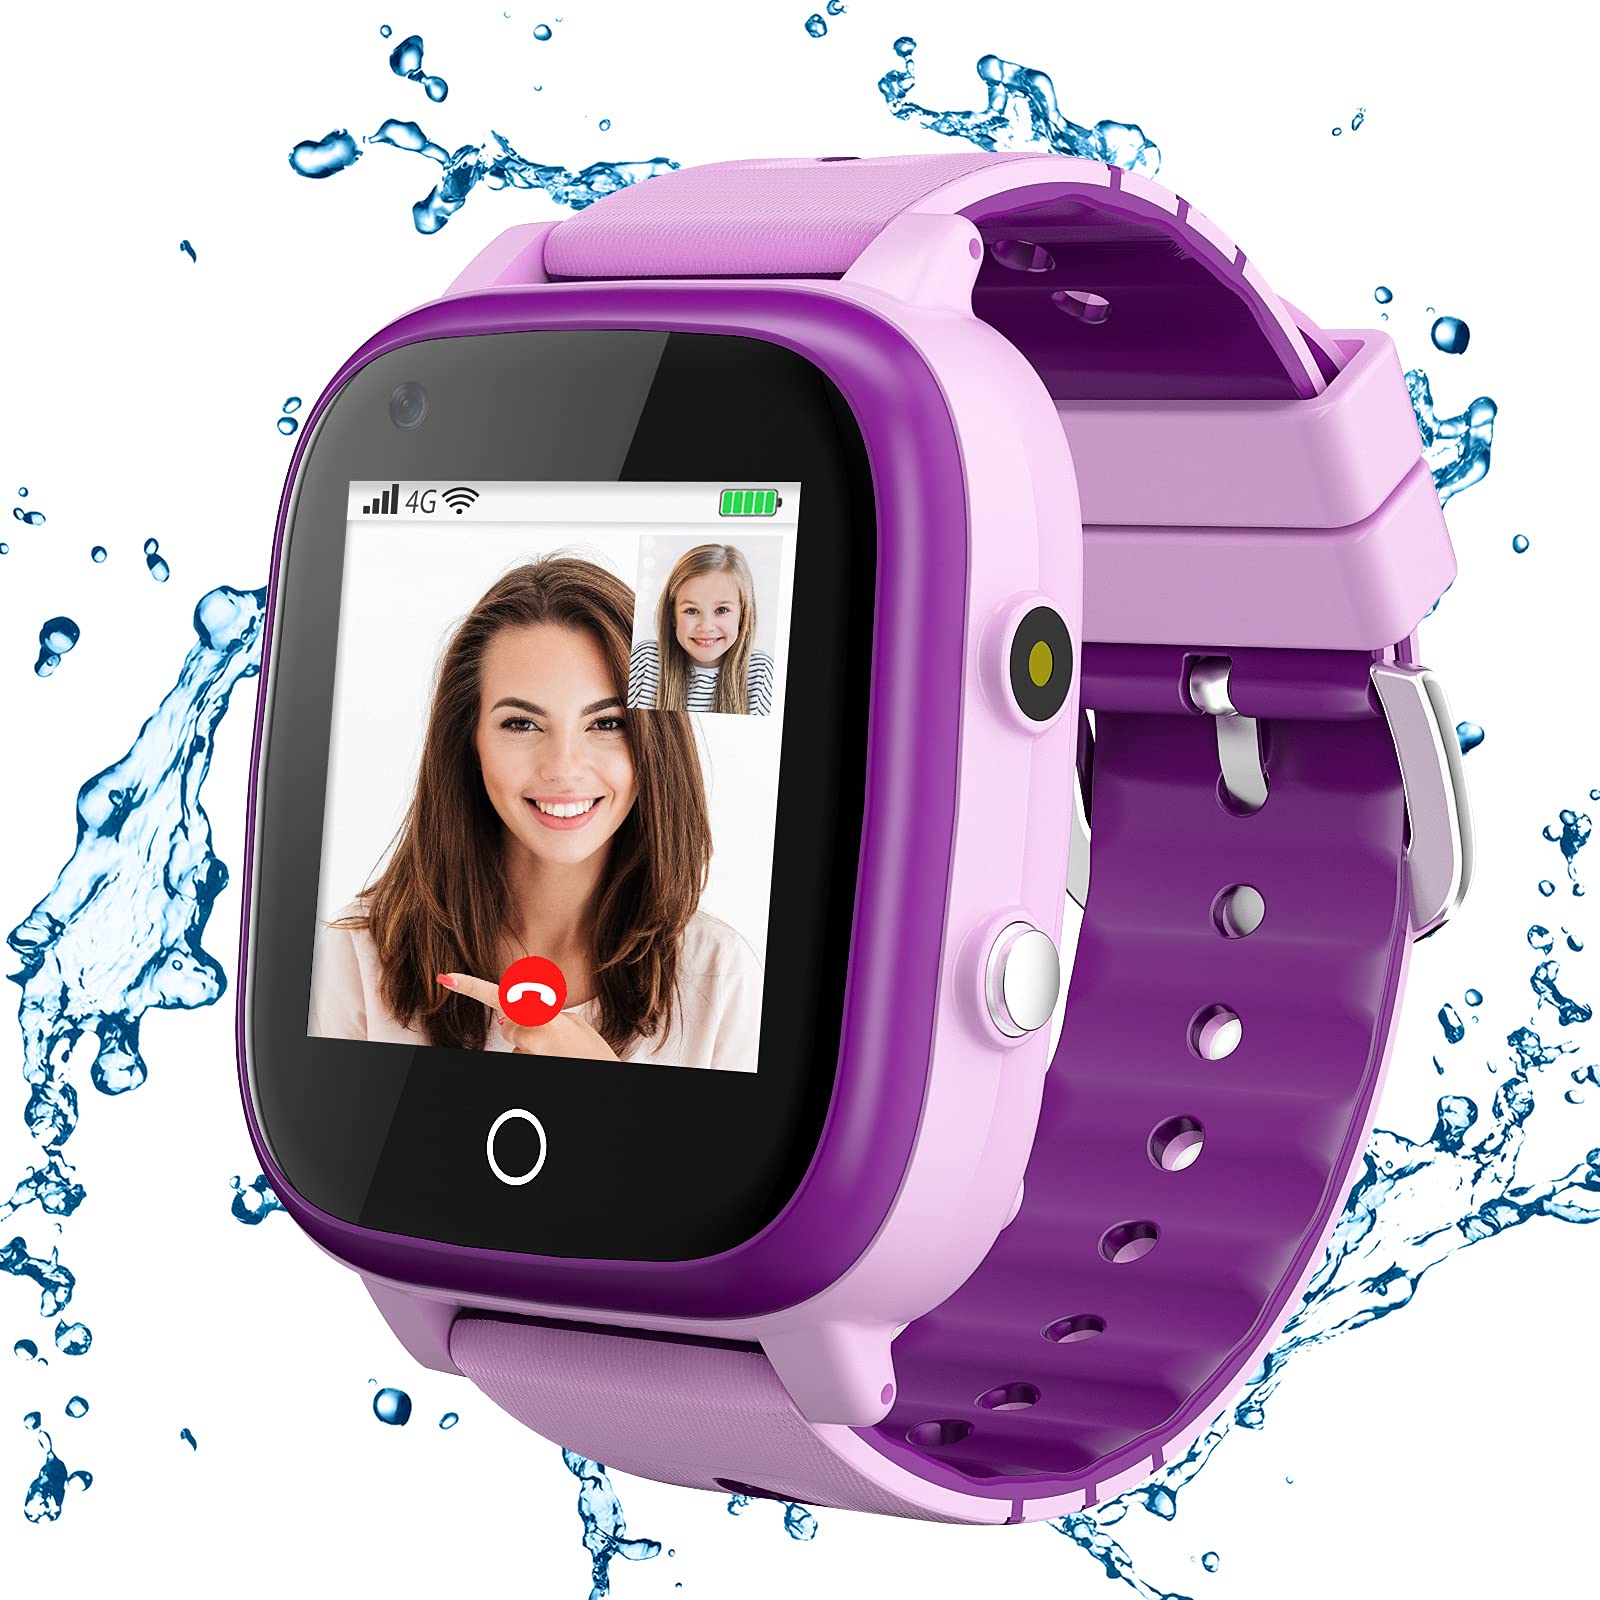 cjc Kids Smart Watch, 4G Kid Smartwatch with GPS Tracker and Calling, SOS Kids Cell Phone Watch, 3-15 Years Boys Girls Christmas Birthday Gifts (Purple T3)